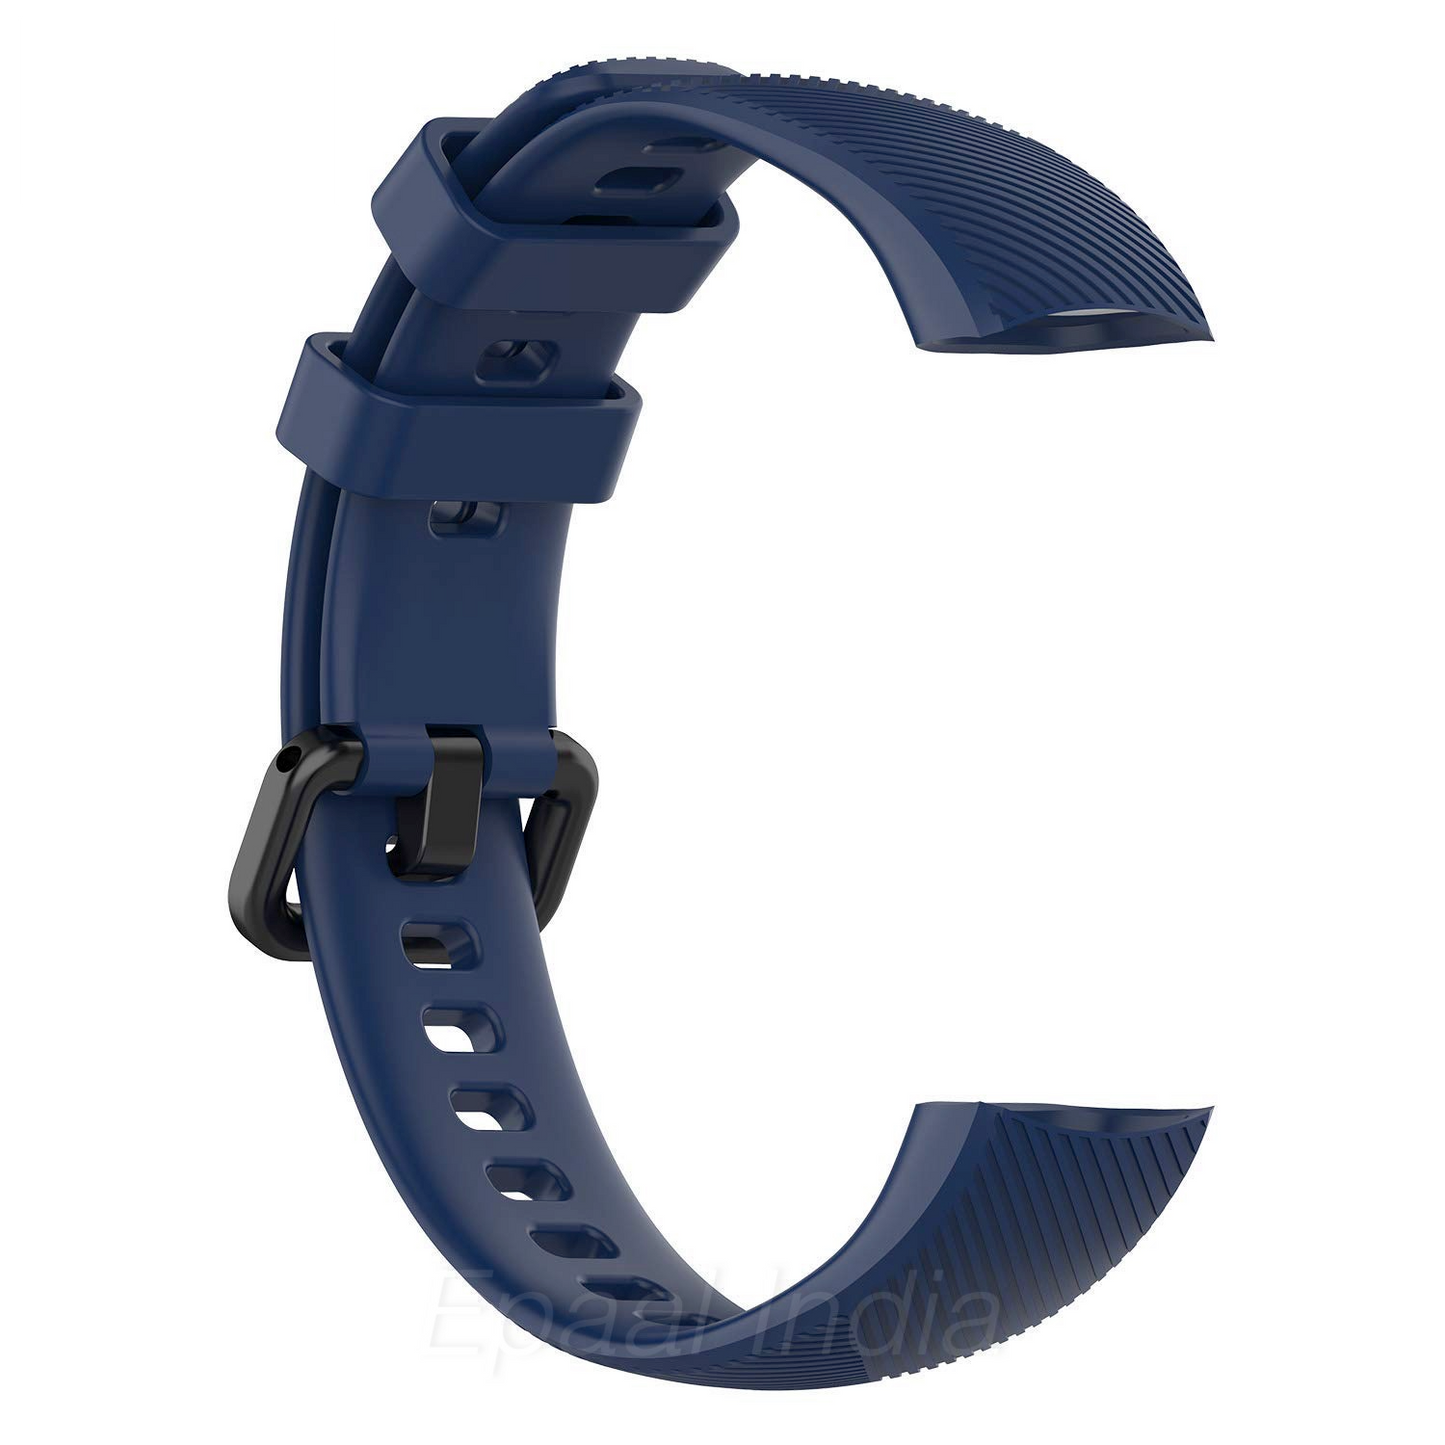 Epaal Silicone Strap for Honor Band 5 / Honor Band 4